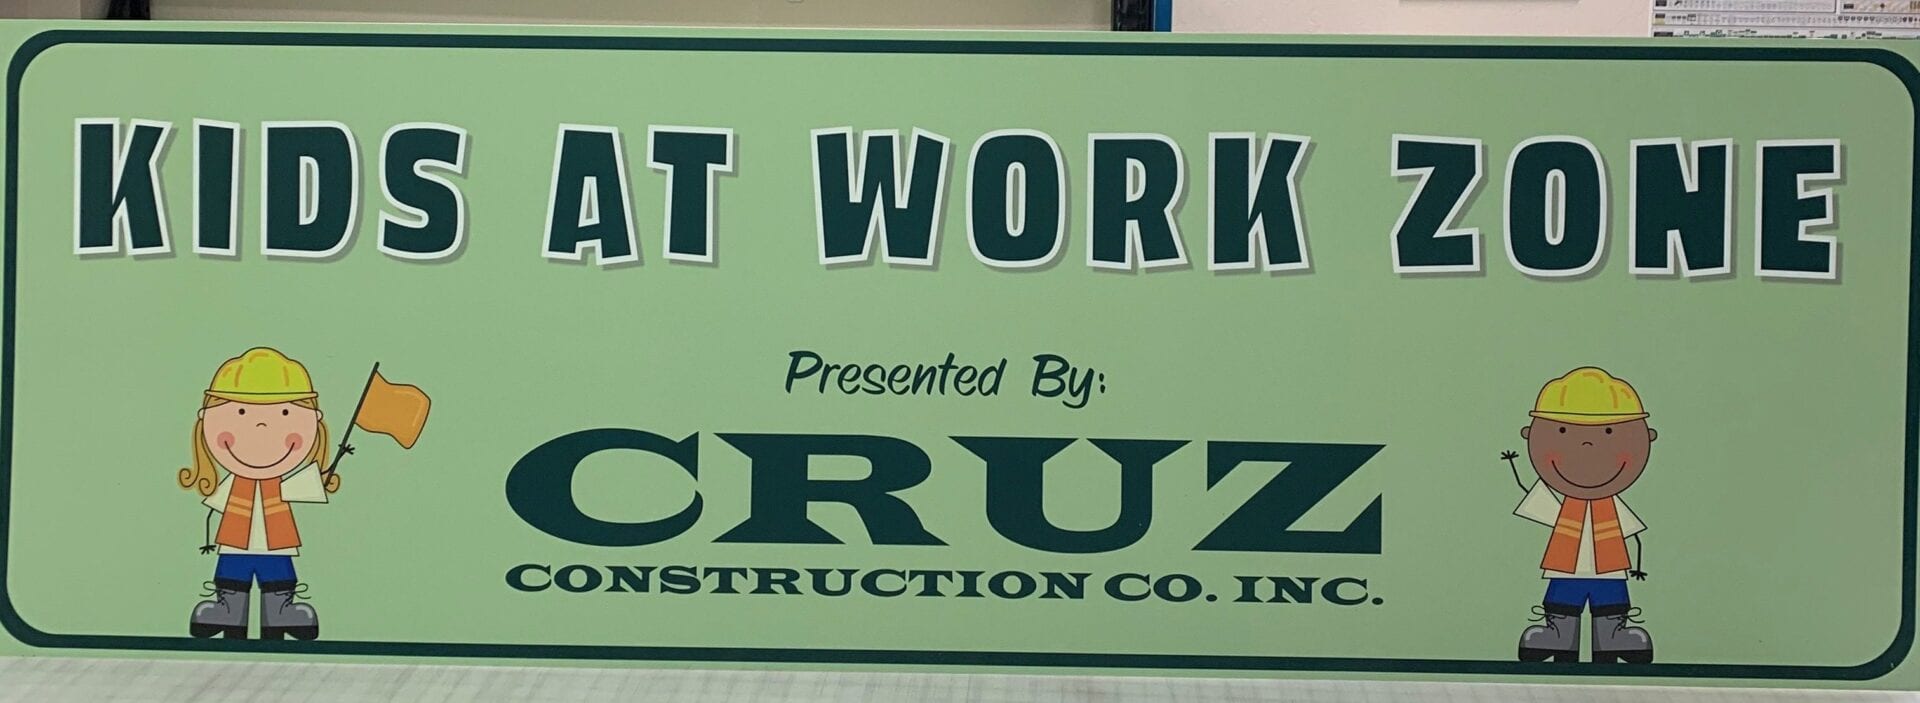 Cruz Construction Co. Inc. Sign - Silver State Barricade and Sign Custom Signs